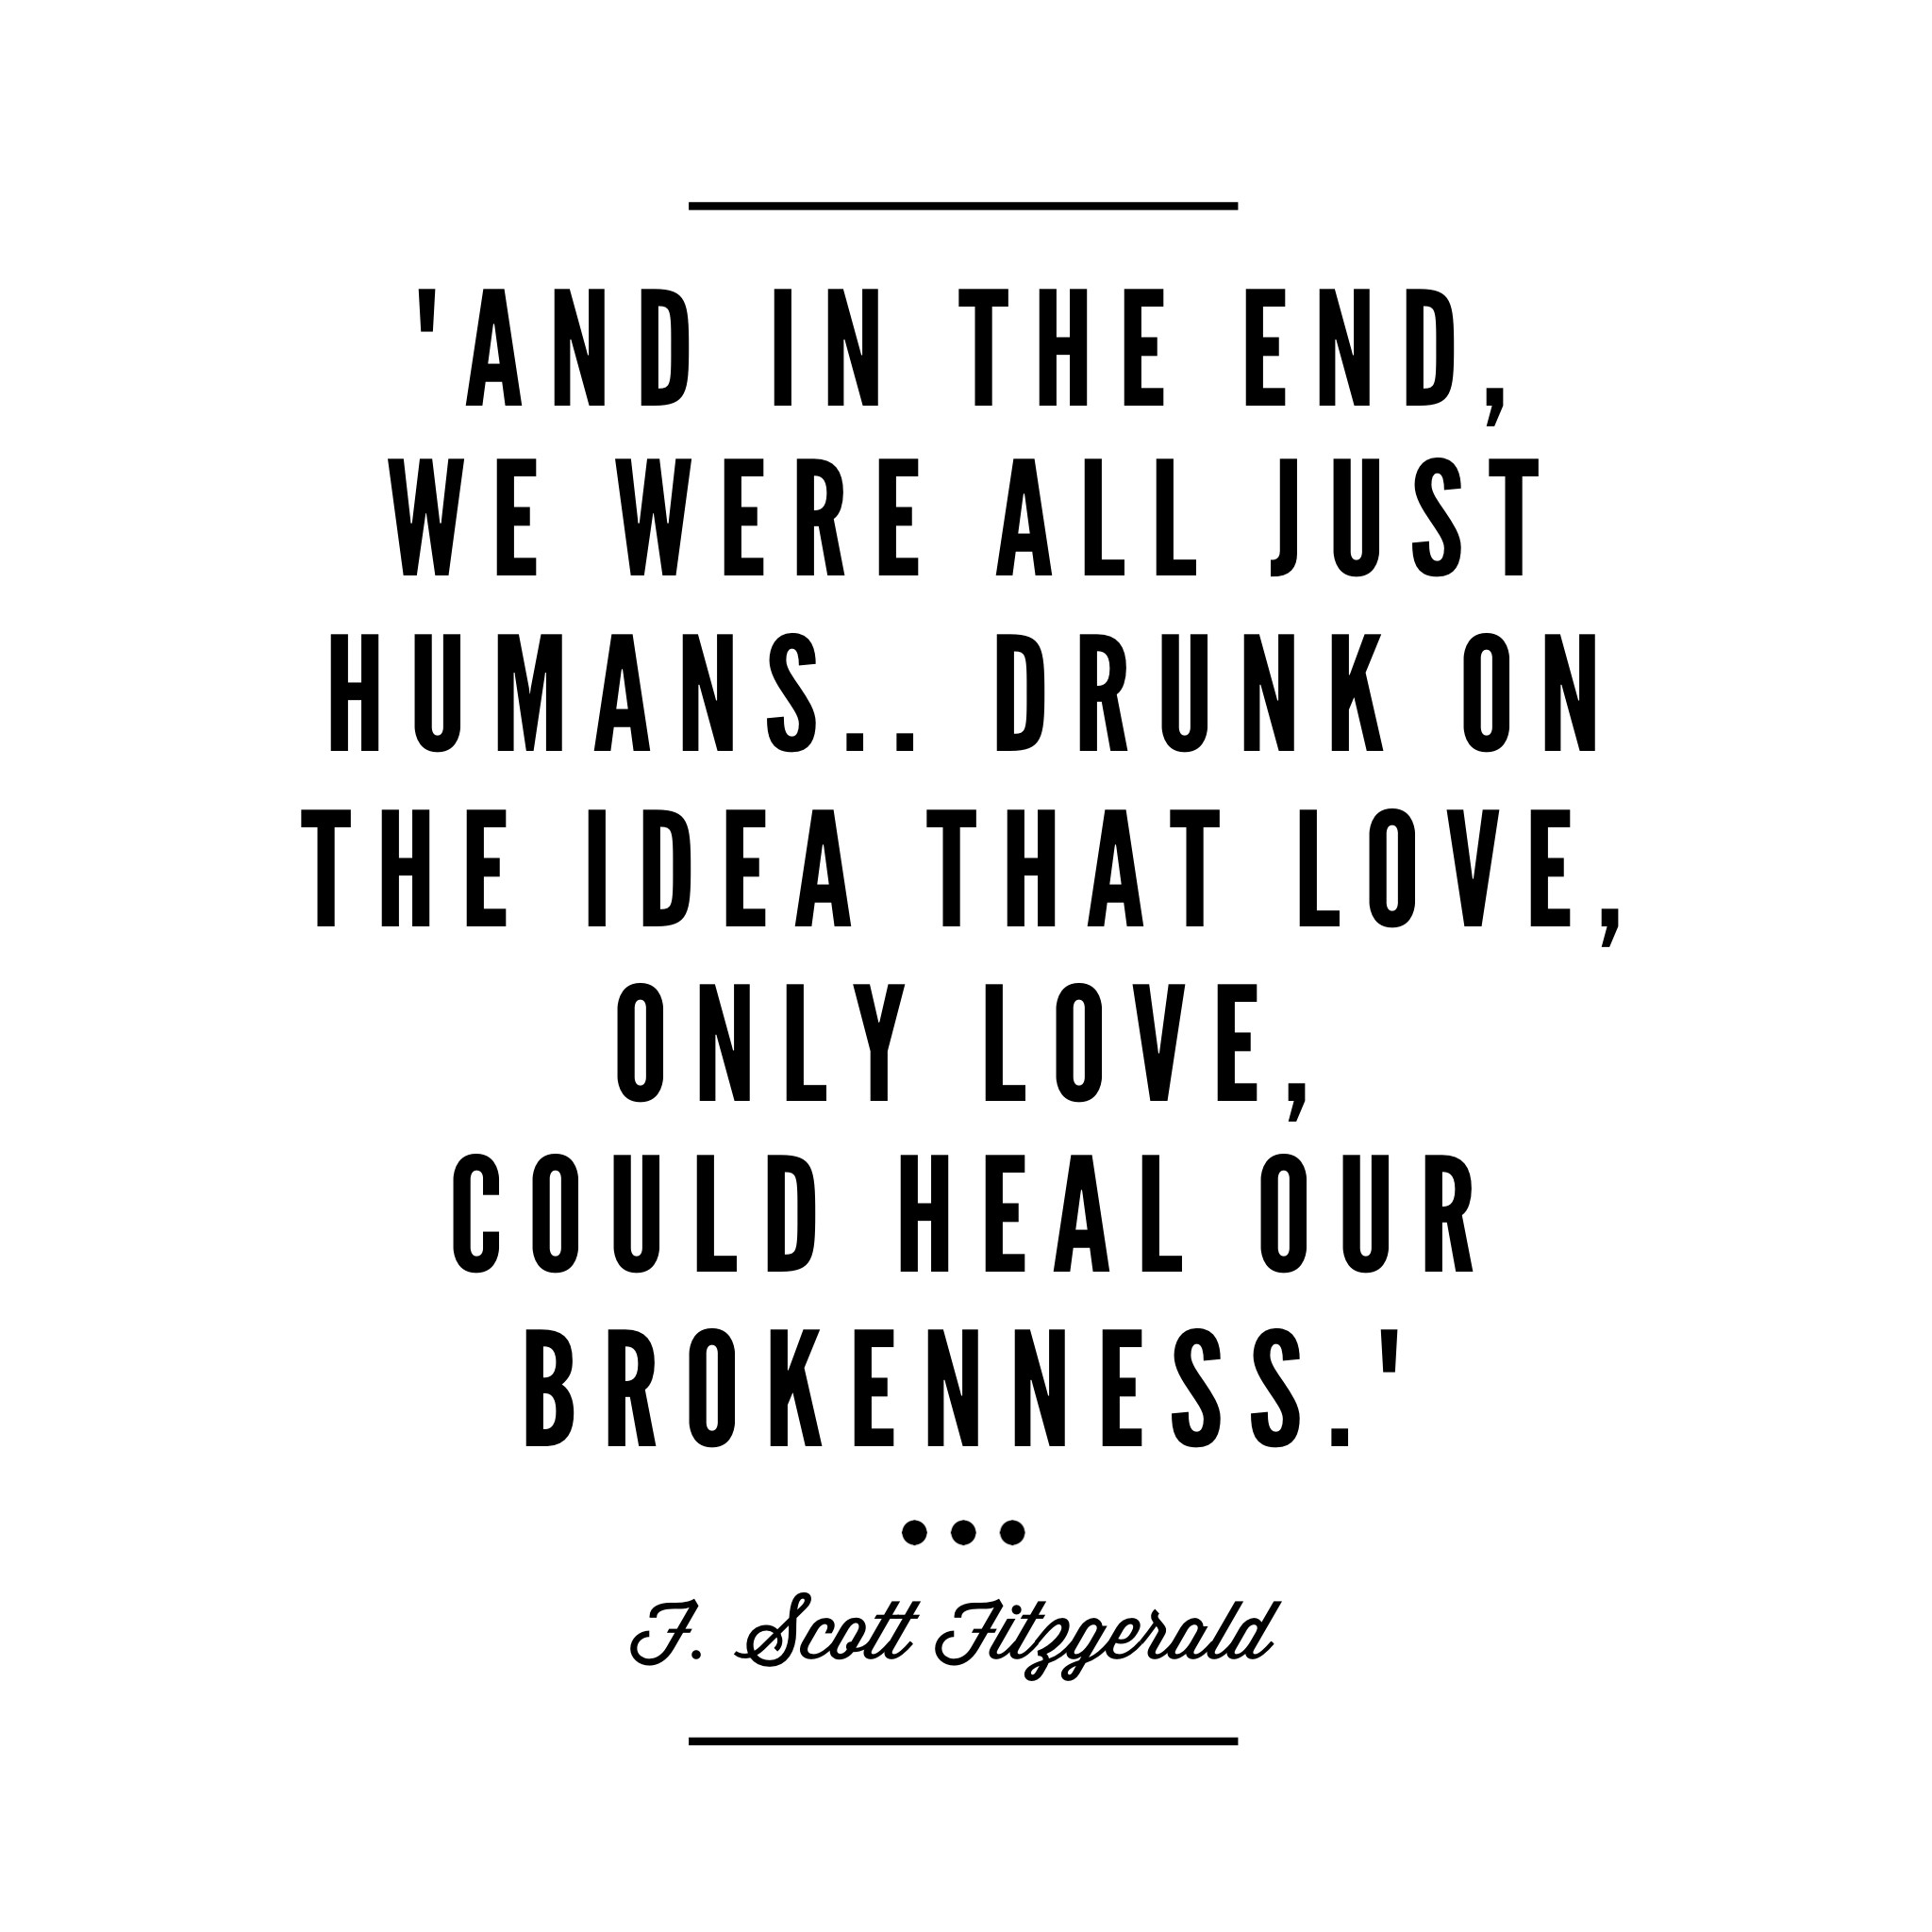 2048x2048 Love, only love, could heal our brokenness (F. Scott Fitzgerald) -  background, wallpaper, quotes Made by breeLferguson